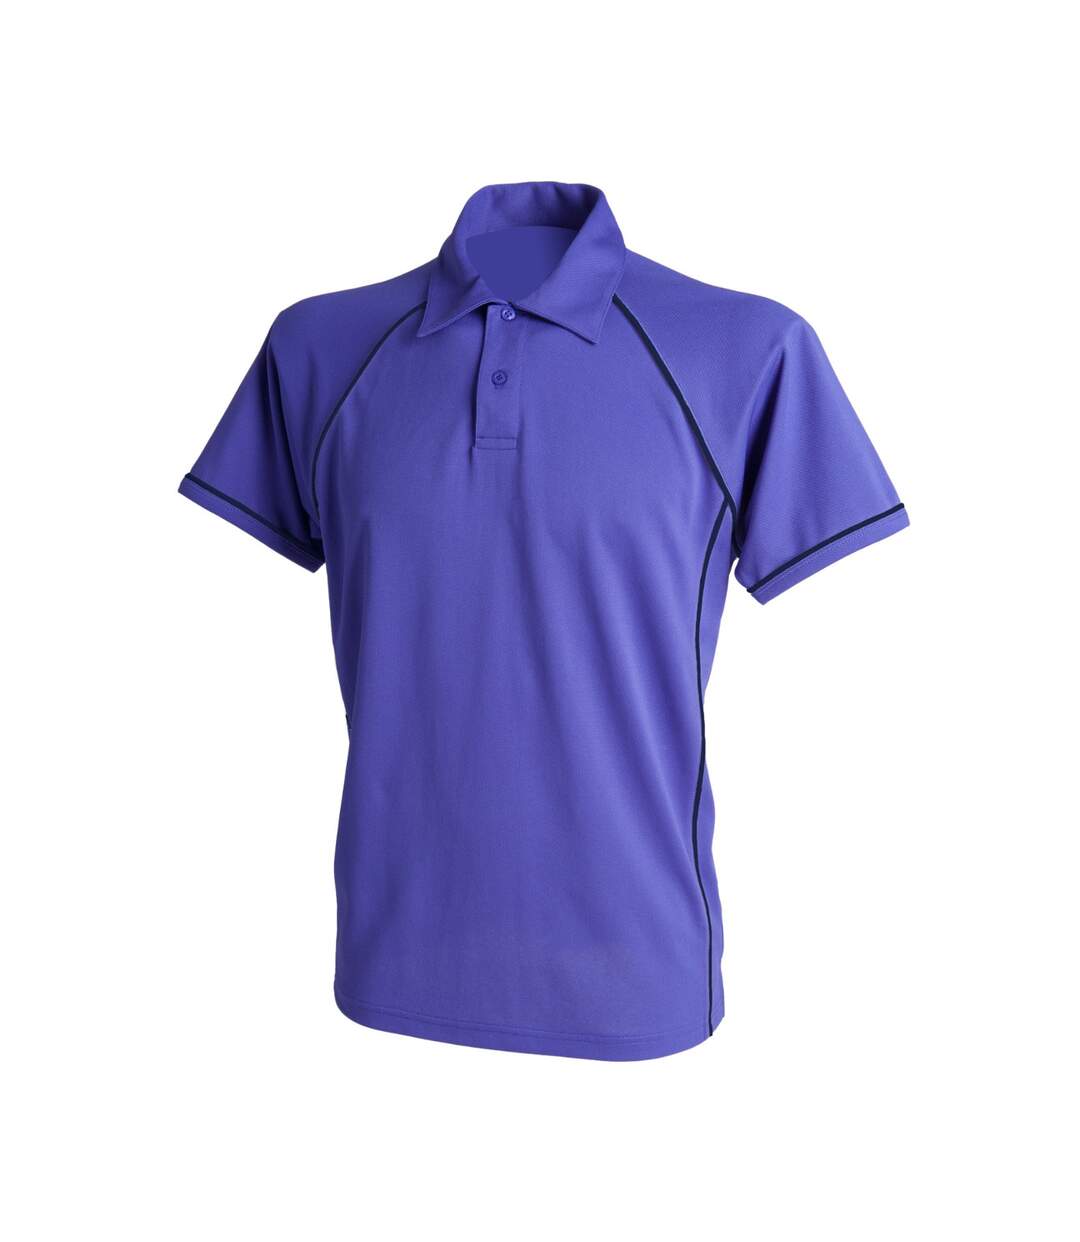 Finden & Hales Mens Piped Performance Sports Polo Shirt (Purple/Navy) - UTRW427